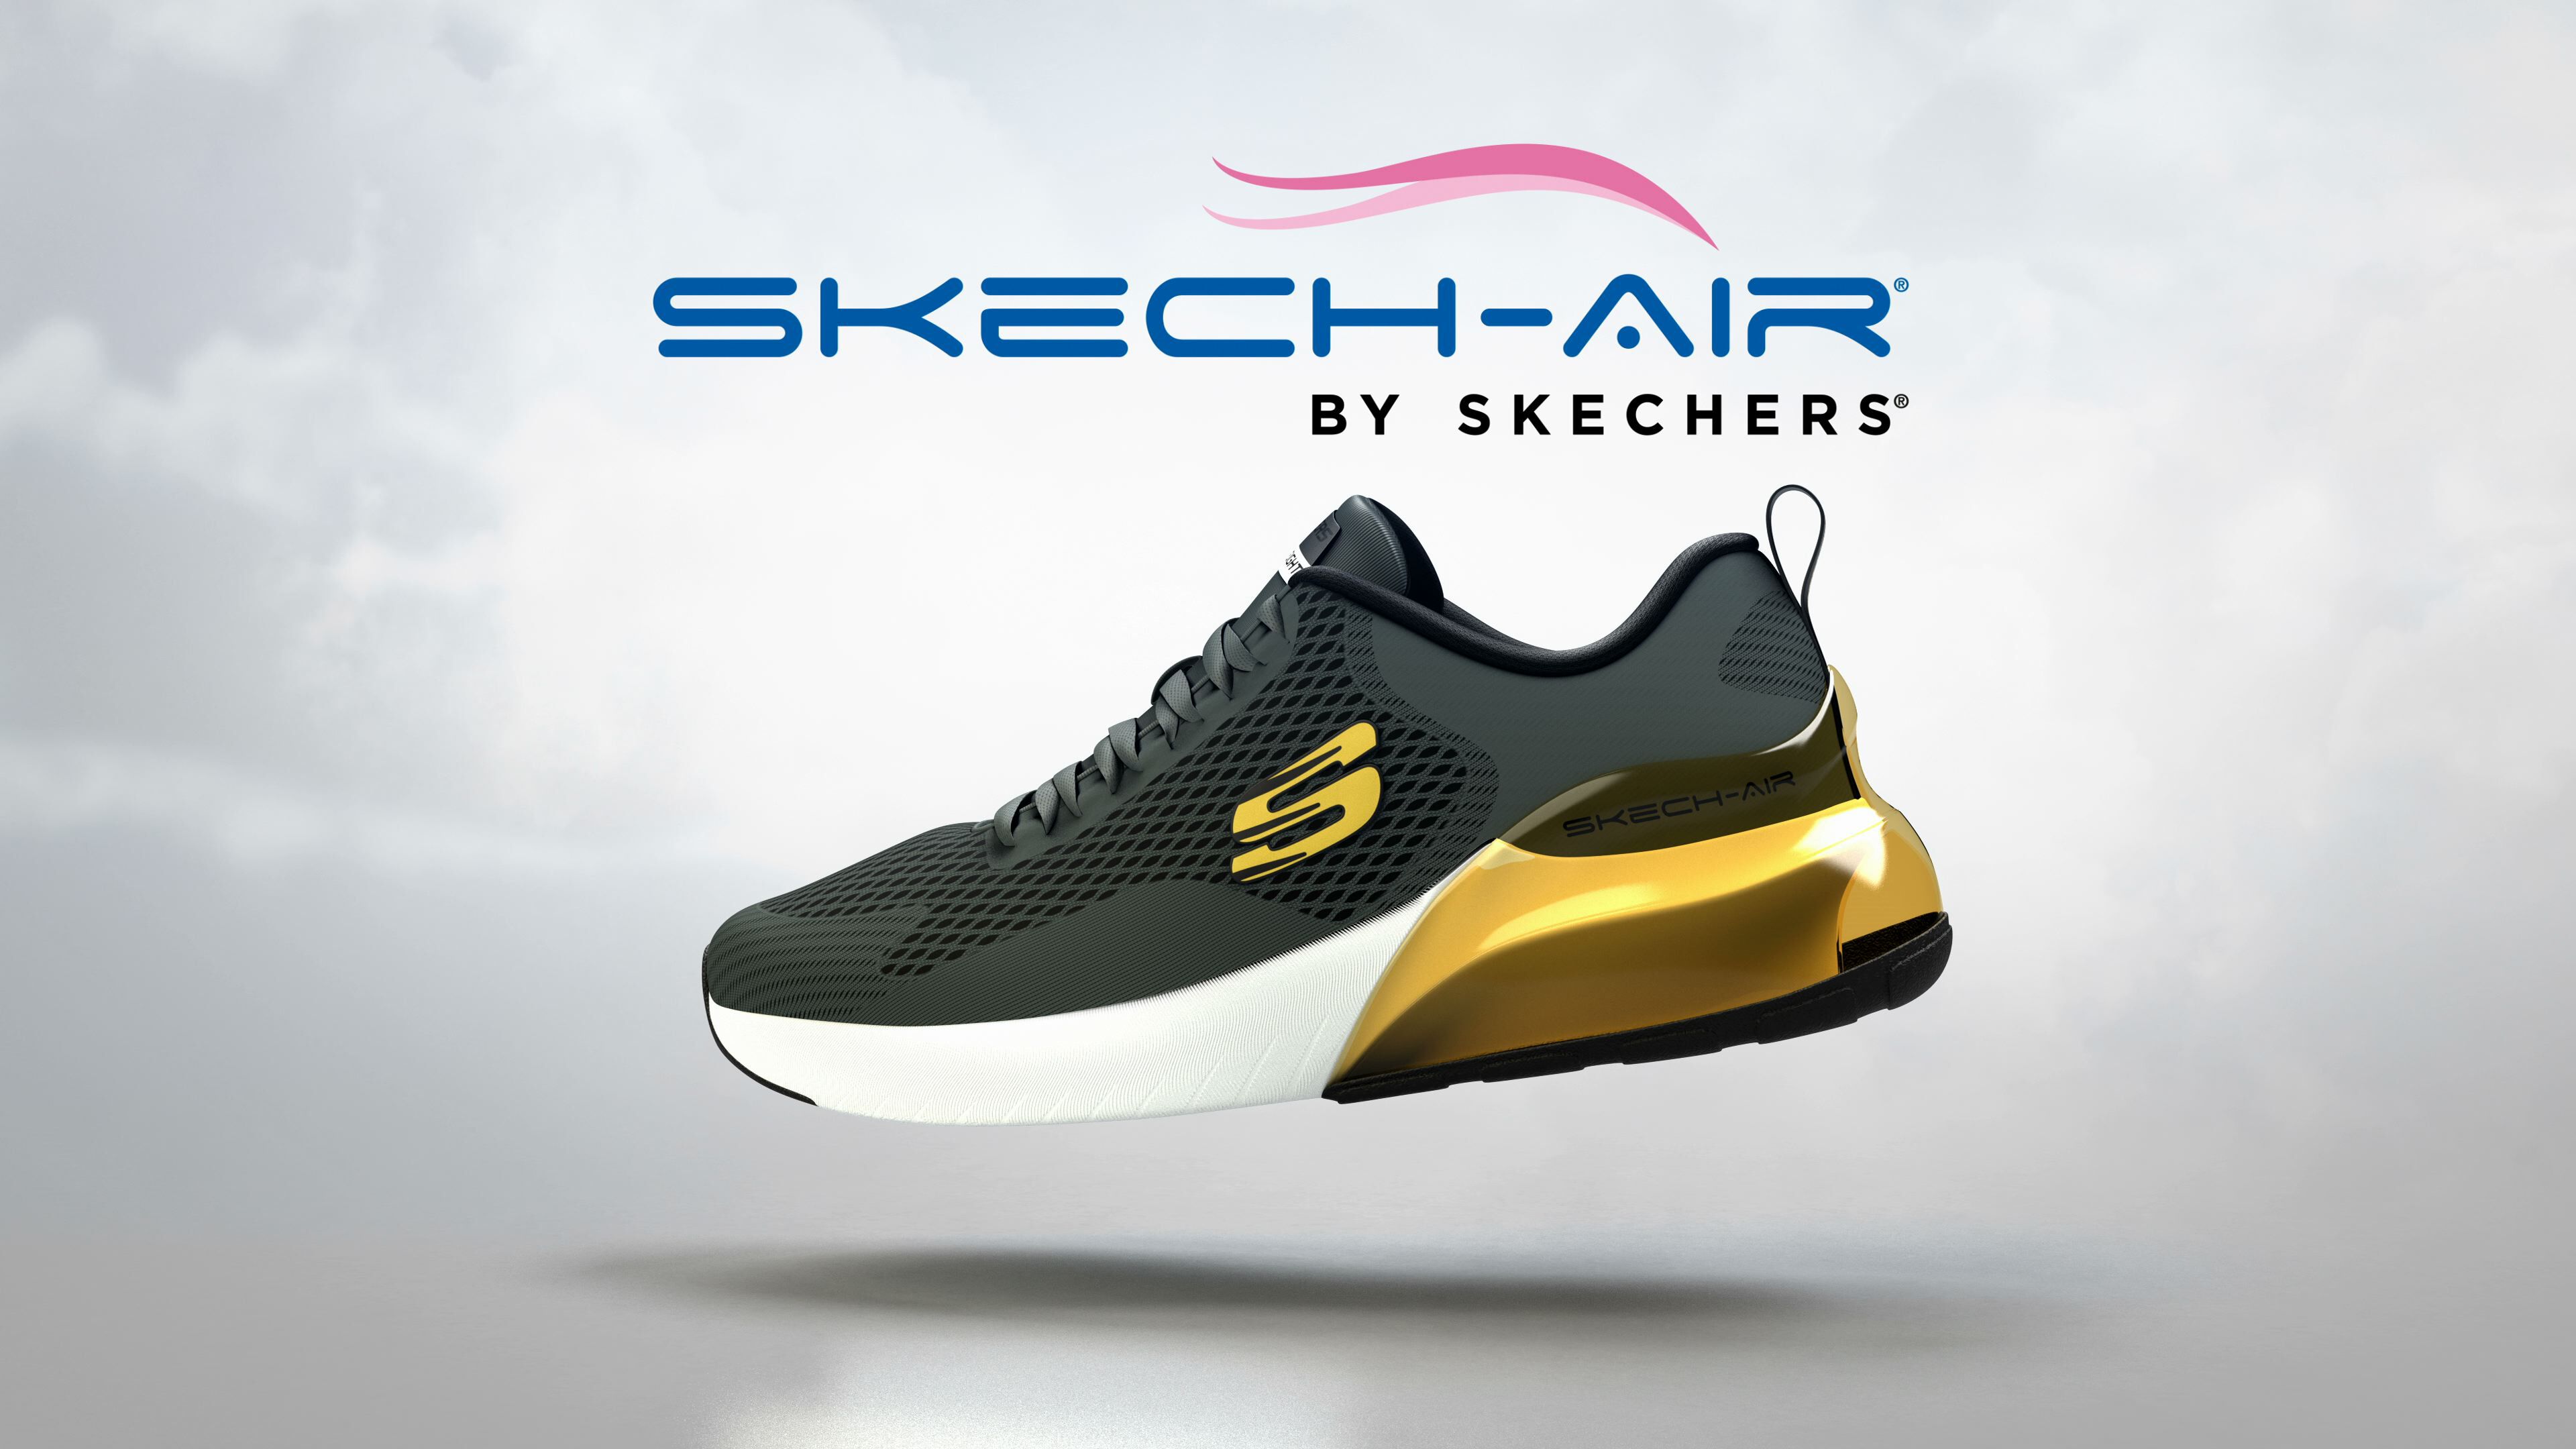 skechers shoes commercial